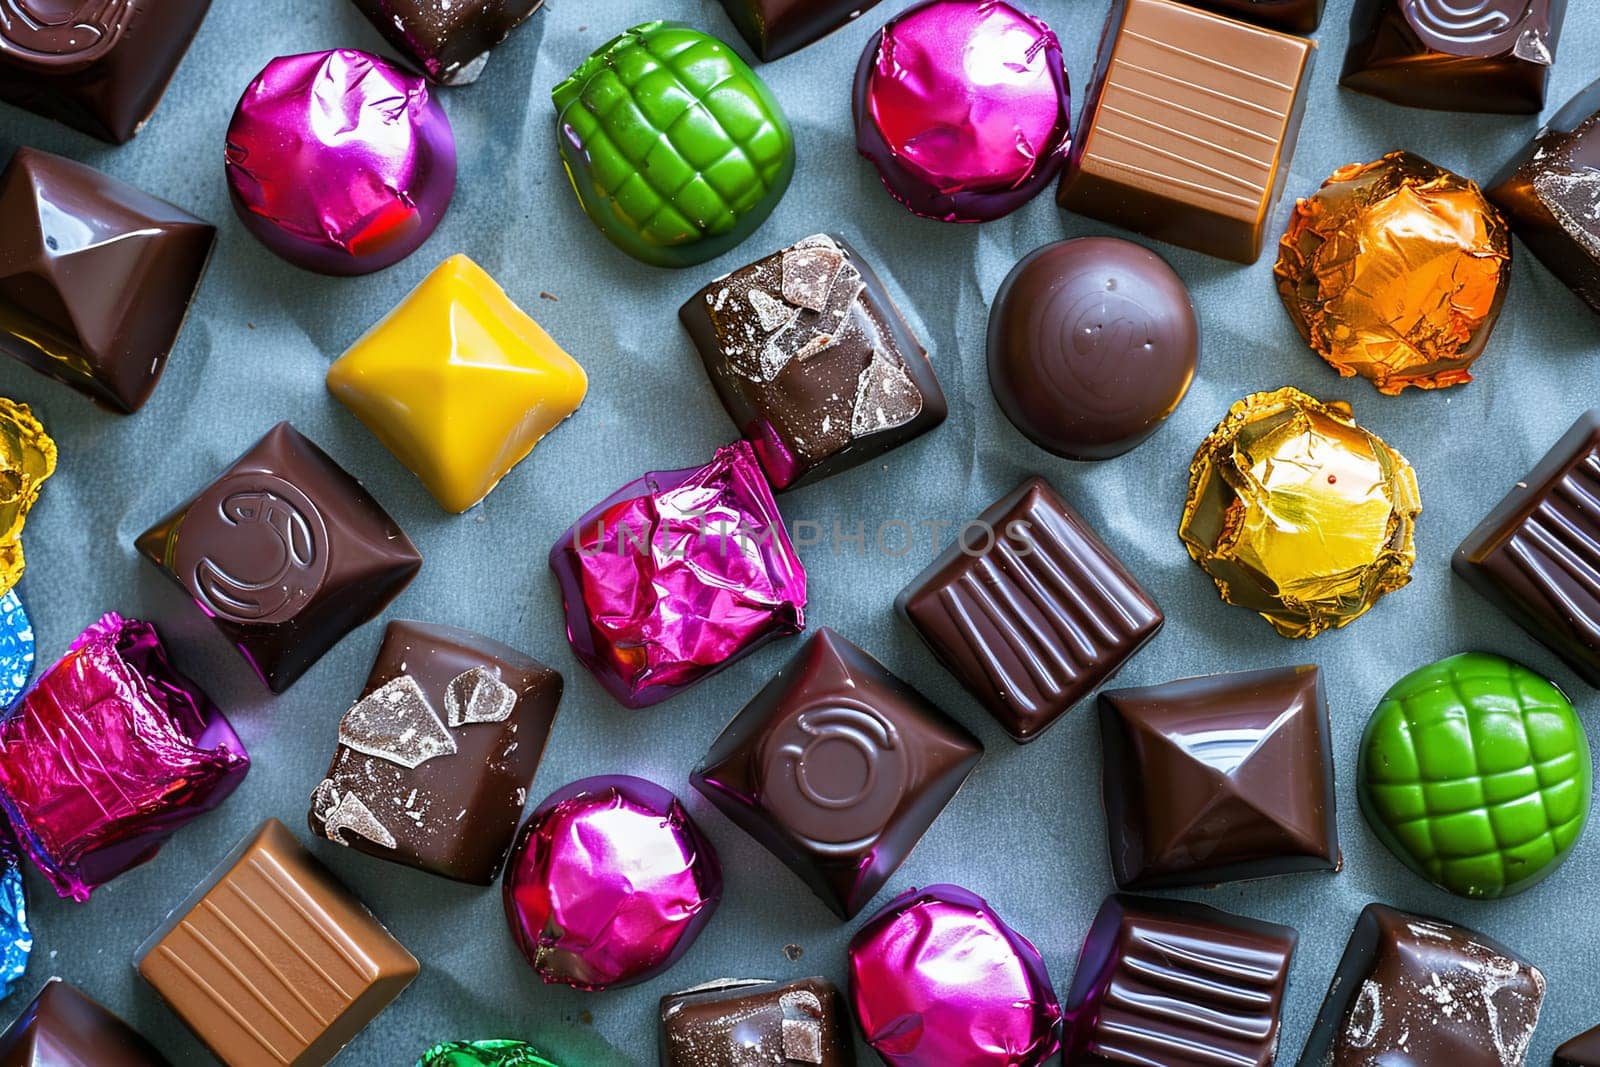 Assorted colorful chocolate candies spread out on a table, showcasing vibrant colors and shiny wrappers.